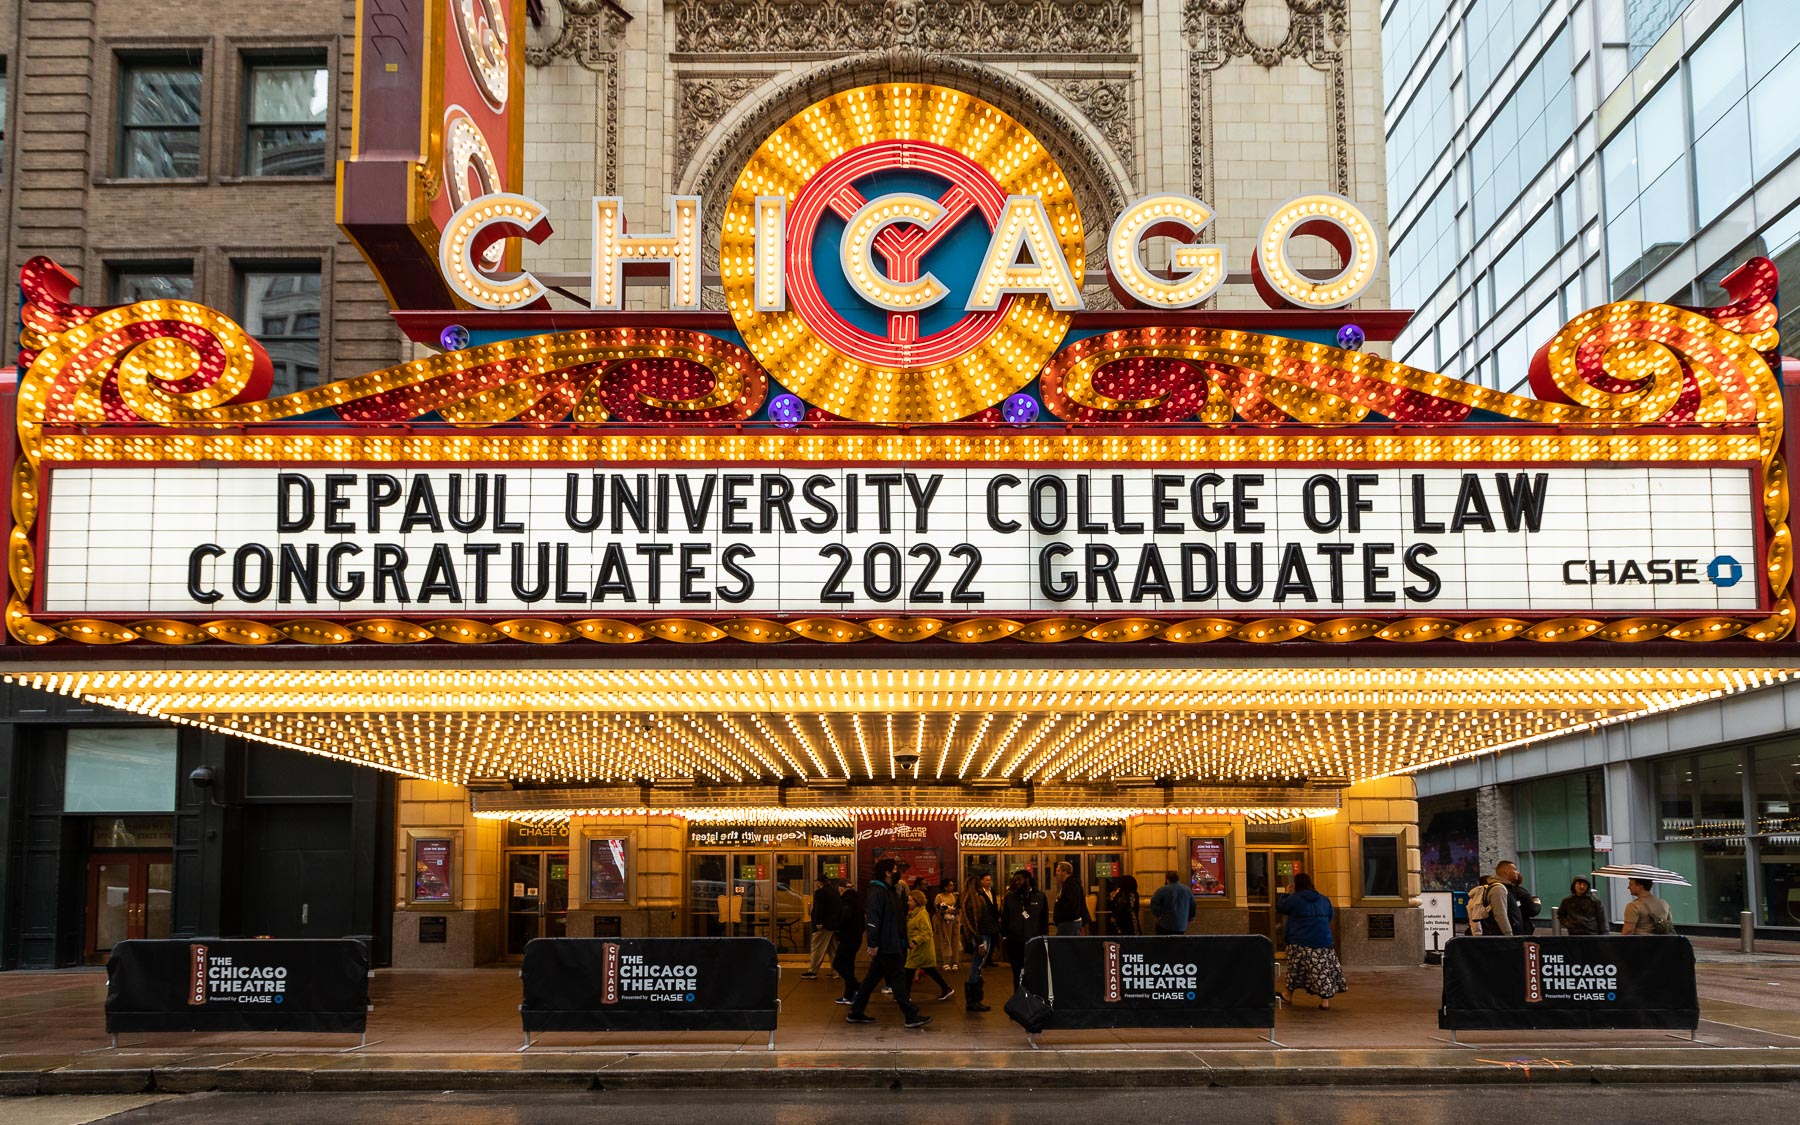 The famous Chicago Theatre marquee welcomes DePaul graduates and their guests to the College of Law ceremony on Saturday, May 21.